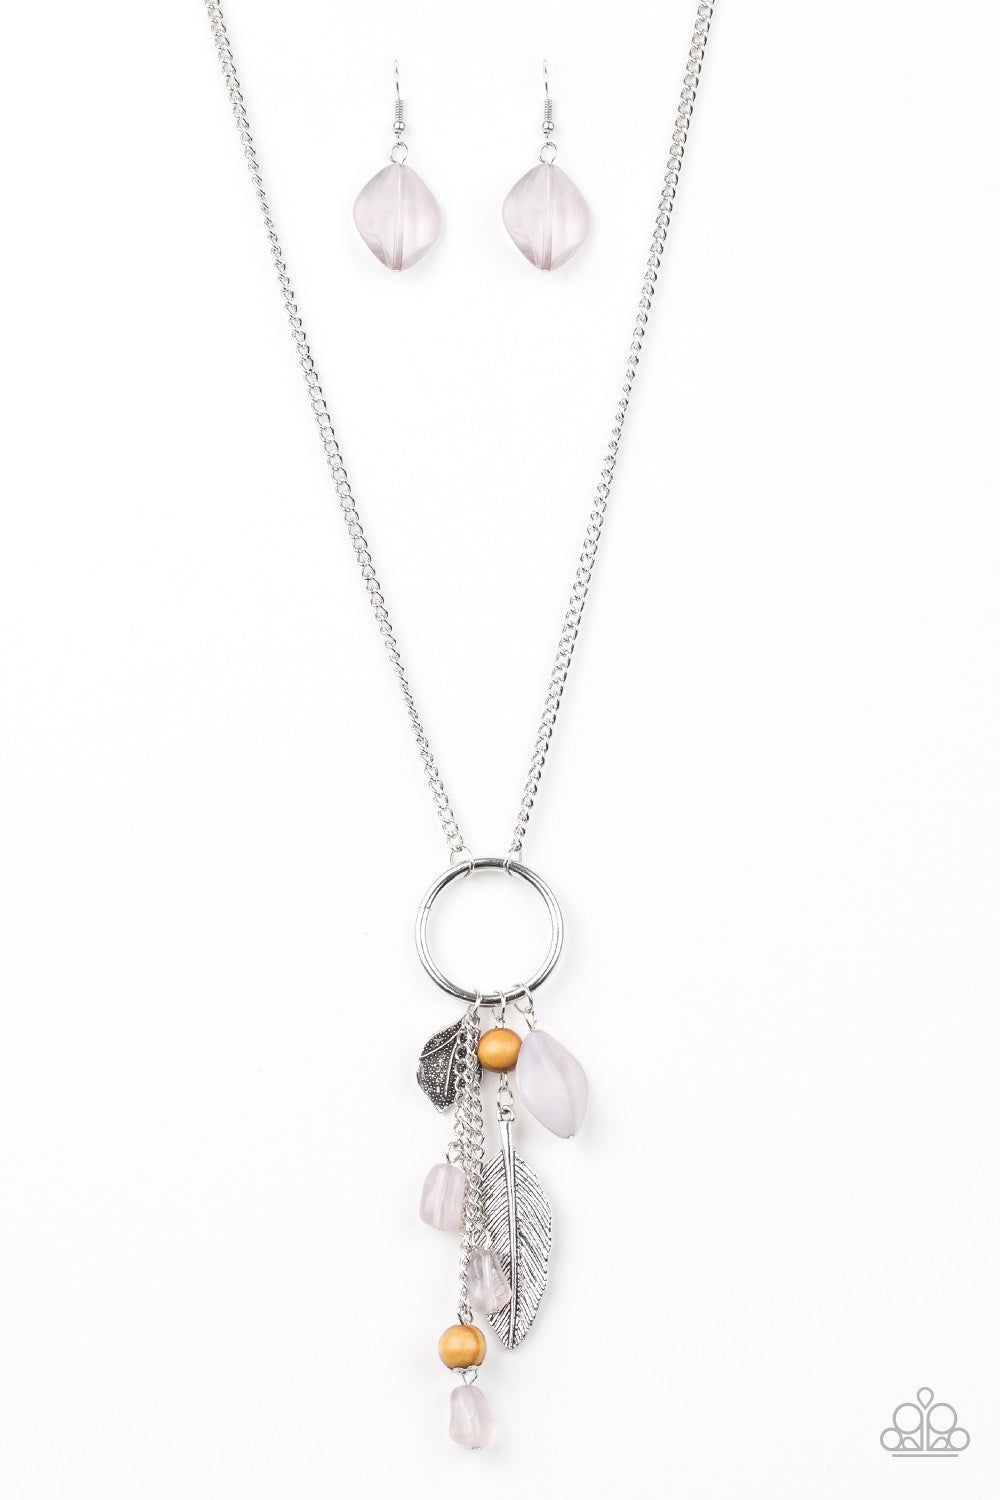 SKY HIGH STYLE - SILVER NECKLACE